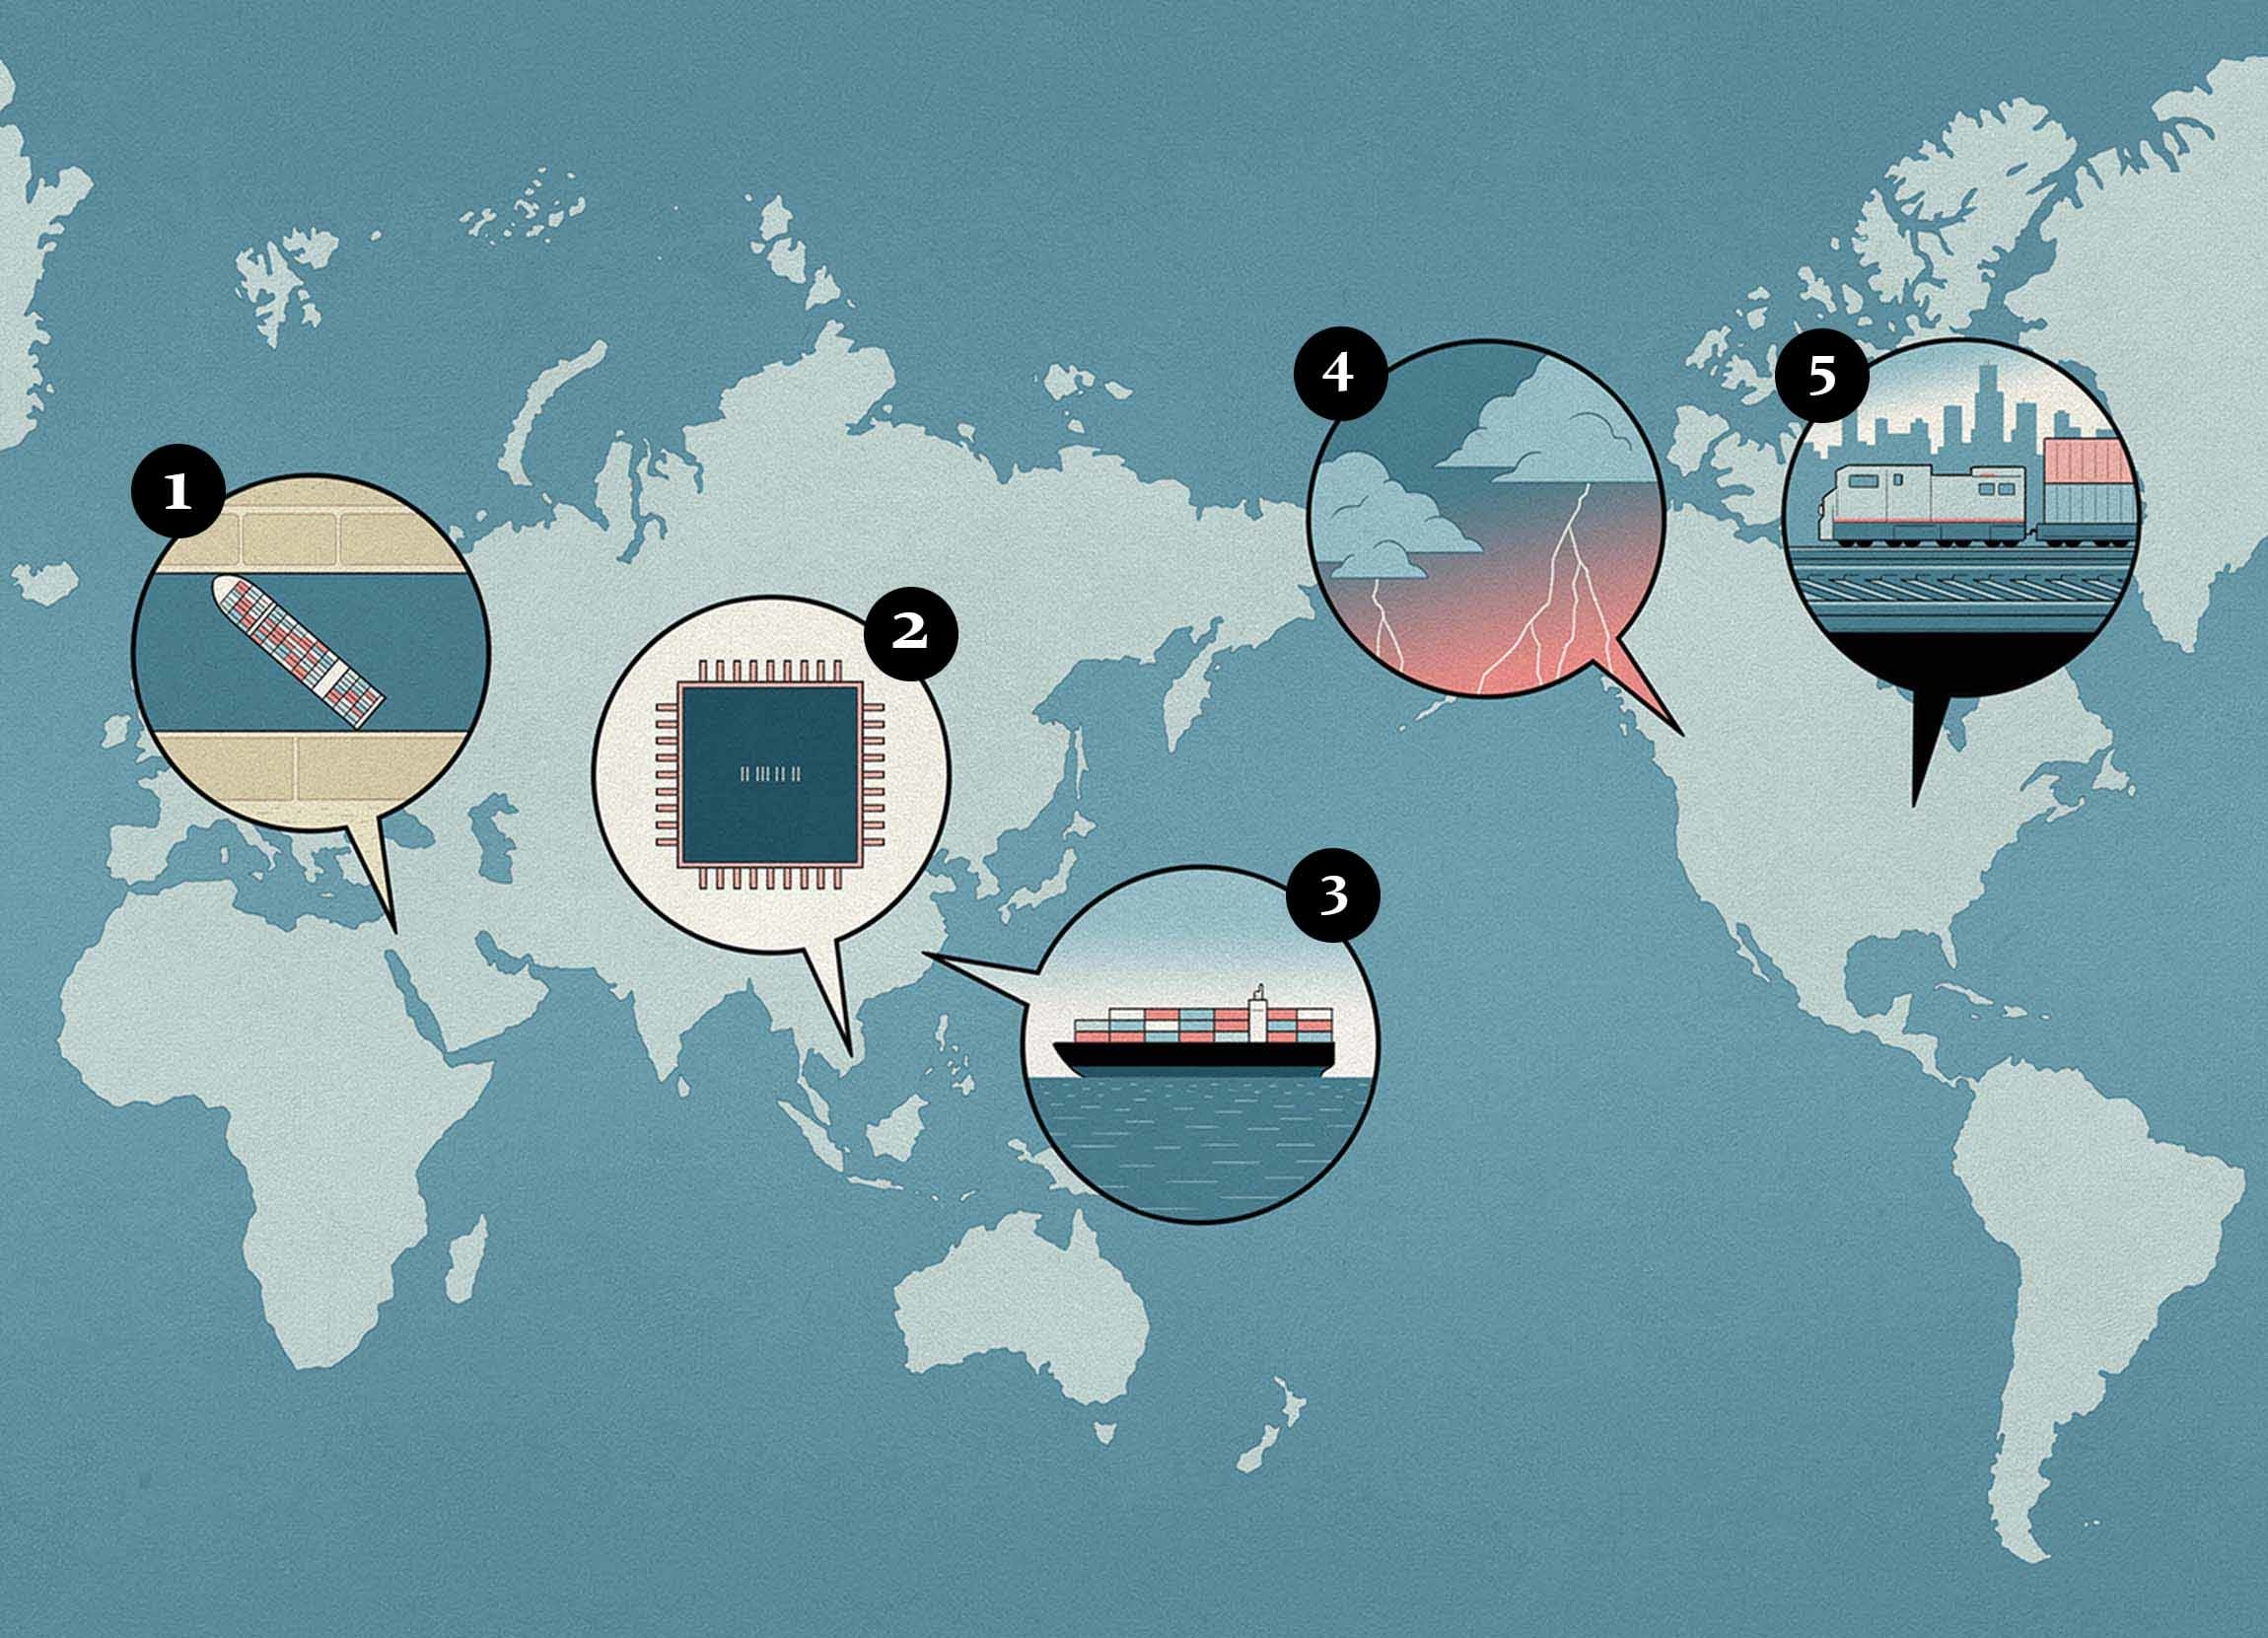 Infographic portraying various supply chain issues around the globe.